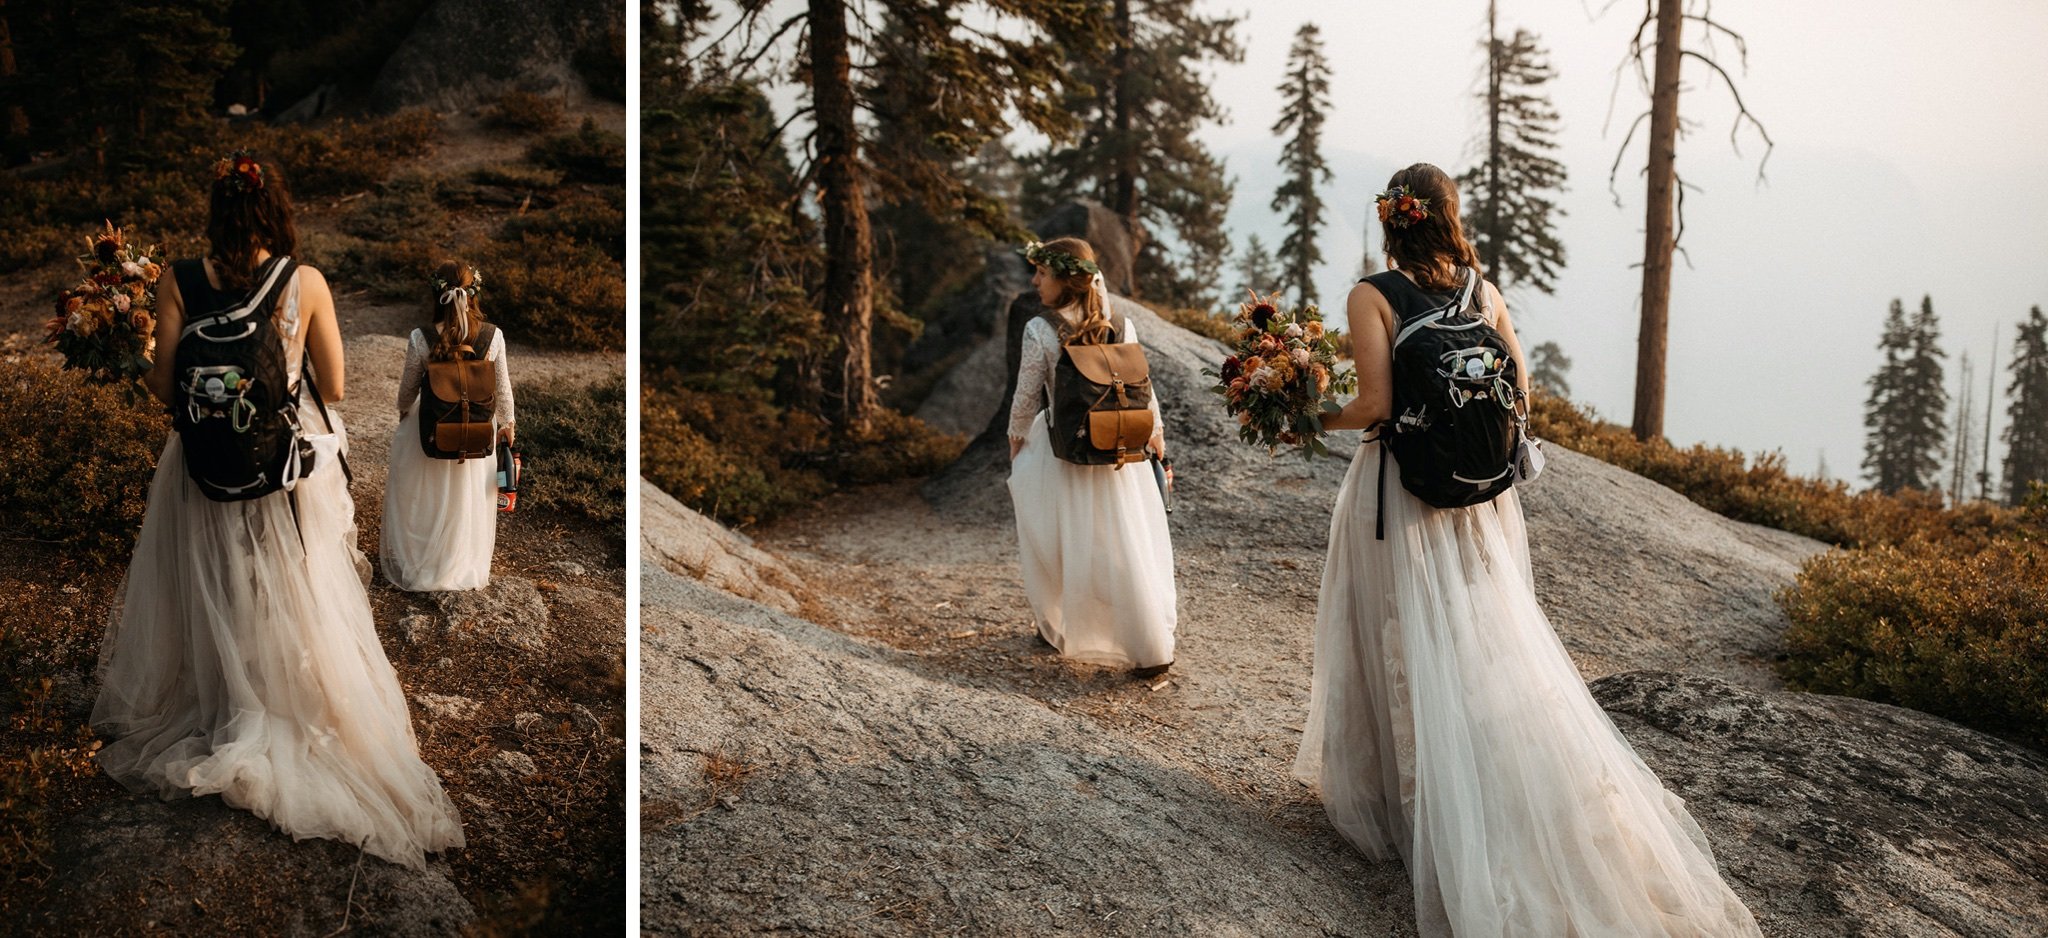 Yosemite National Park Elopement with Two Brides-Will Khoury86.jpg